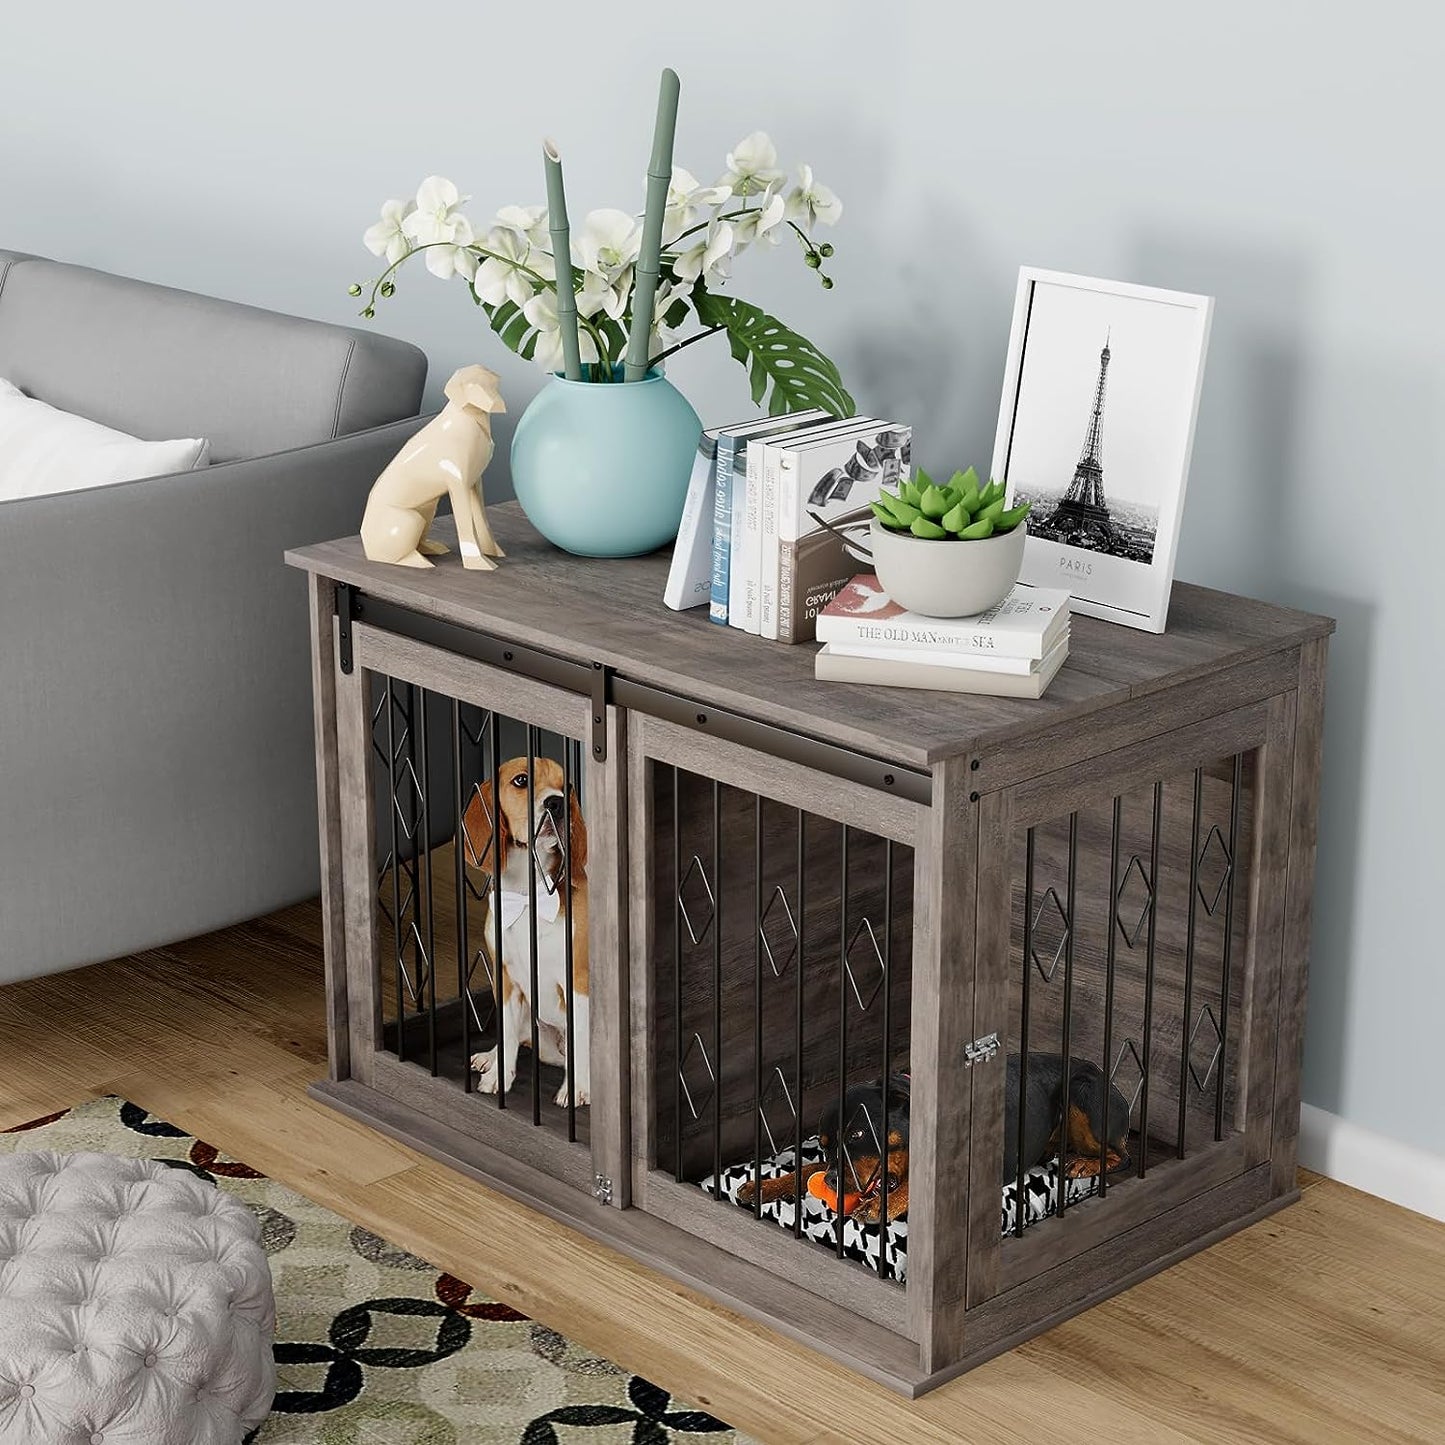 Arlopu Large Dog Crate Furniture with Sliding Barn Door, Wooden Indoor Dog Kennel w/Flip-top, 39.4'' Heavy Duty Modern Puppy Dog Cage End Table W/ Detachable Divider for Small/Medium Pets